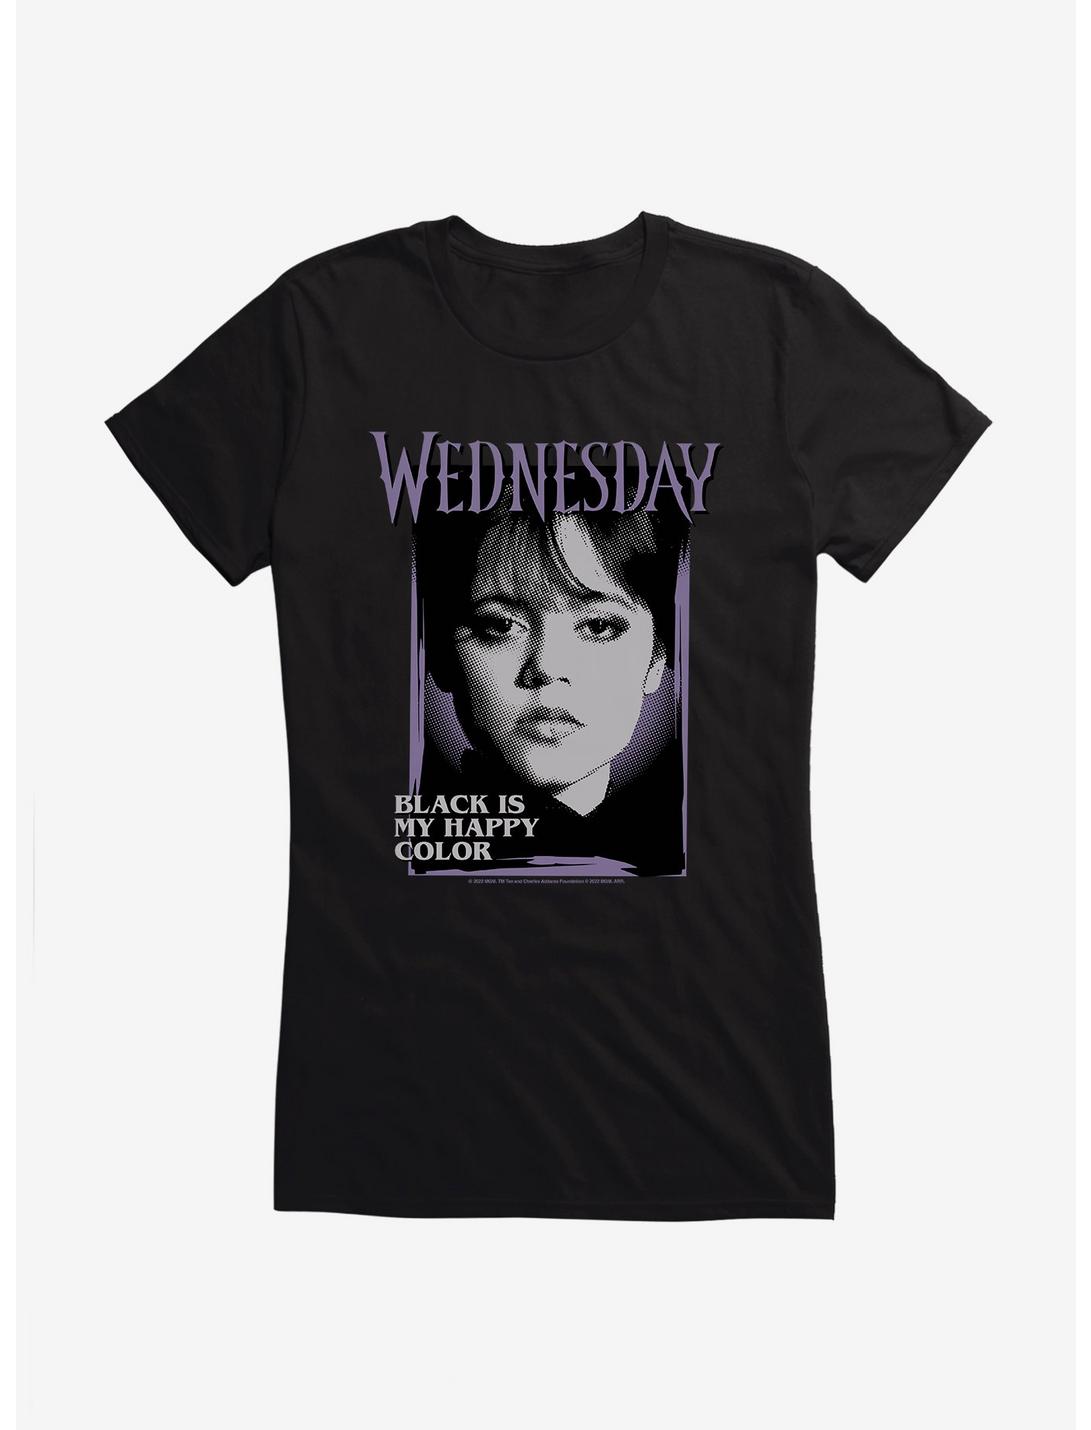 Wednesday Black Is My Happy Color Girls T-Shirt, BLACK, hi-res